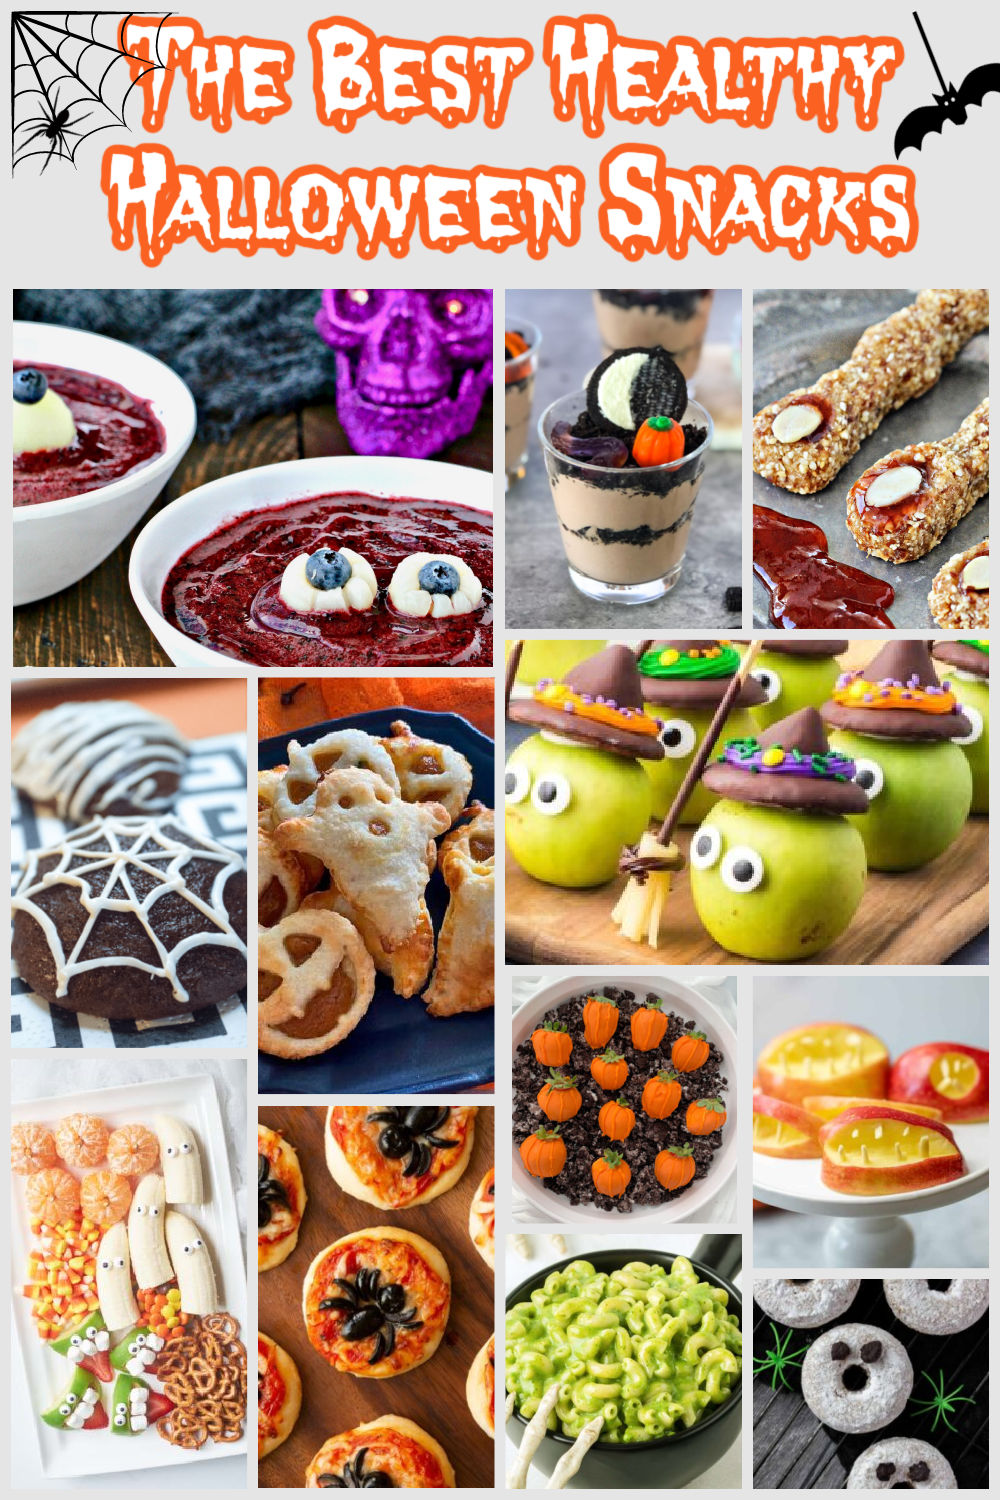 Collage of the best healthy Halloween snacks